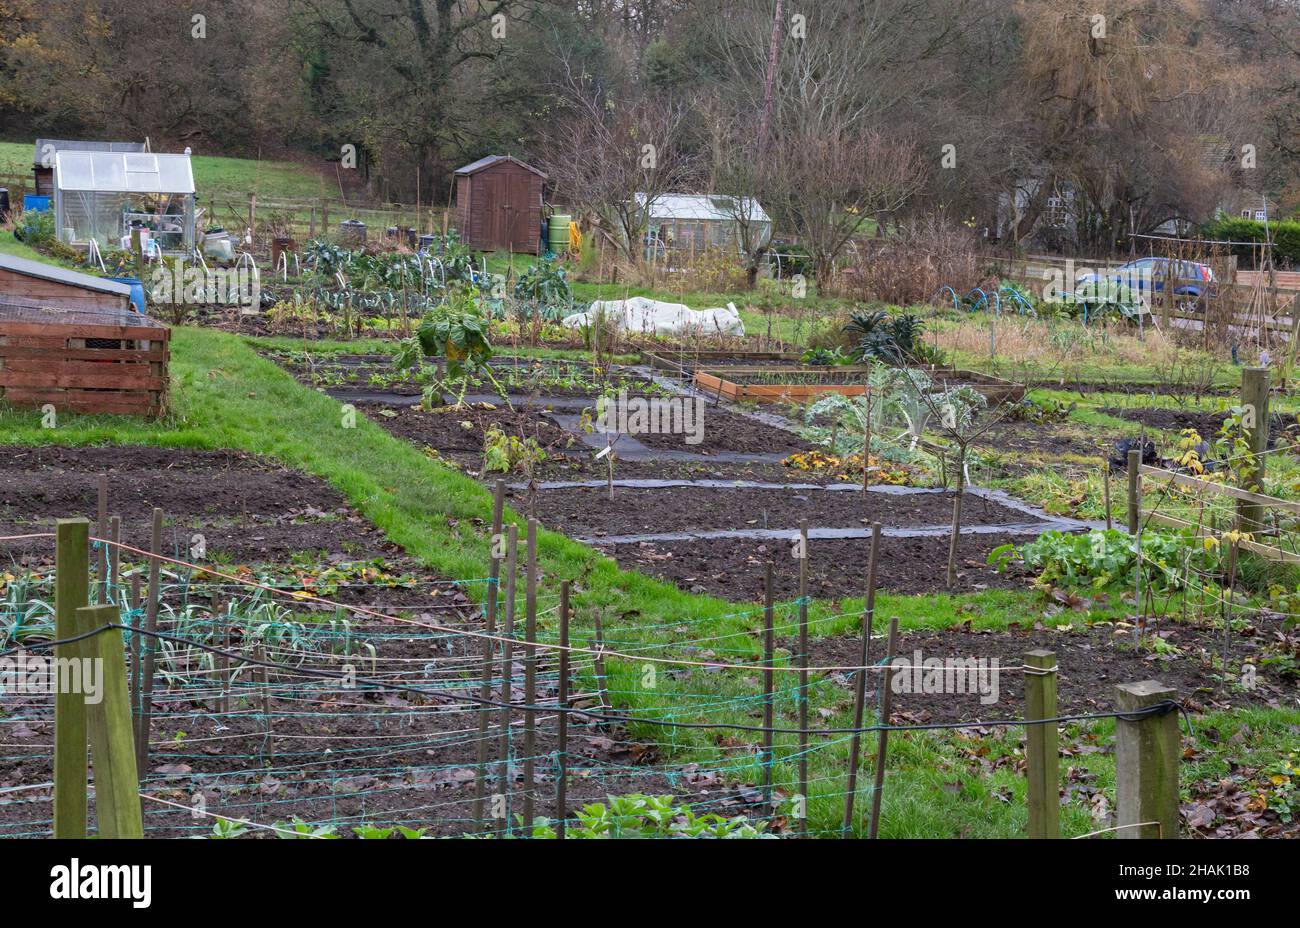 Allotments in Esholt, West Yorkshire. Stock Photo